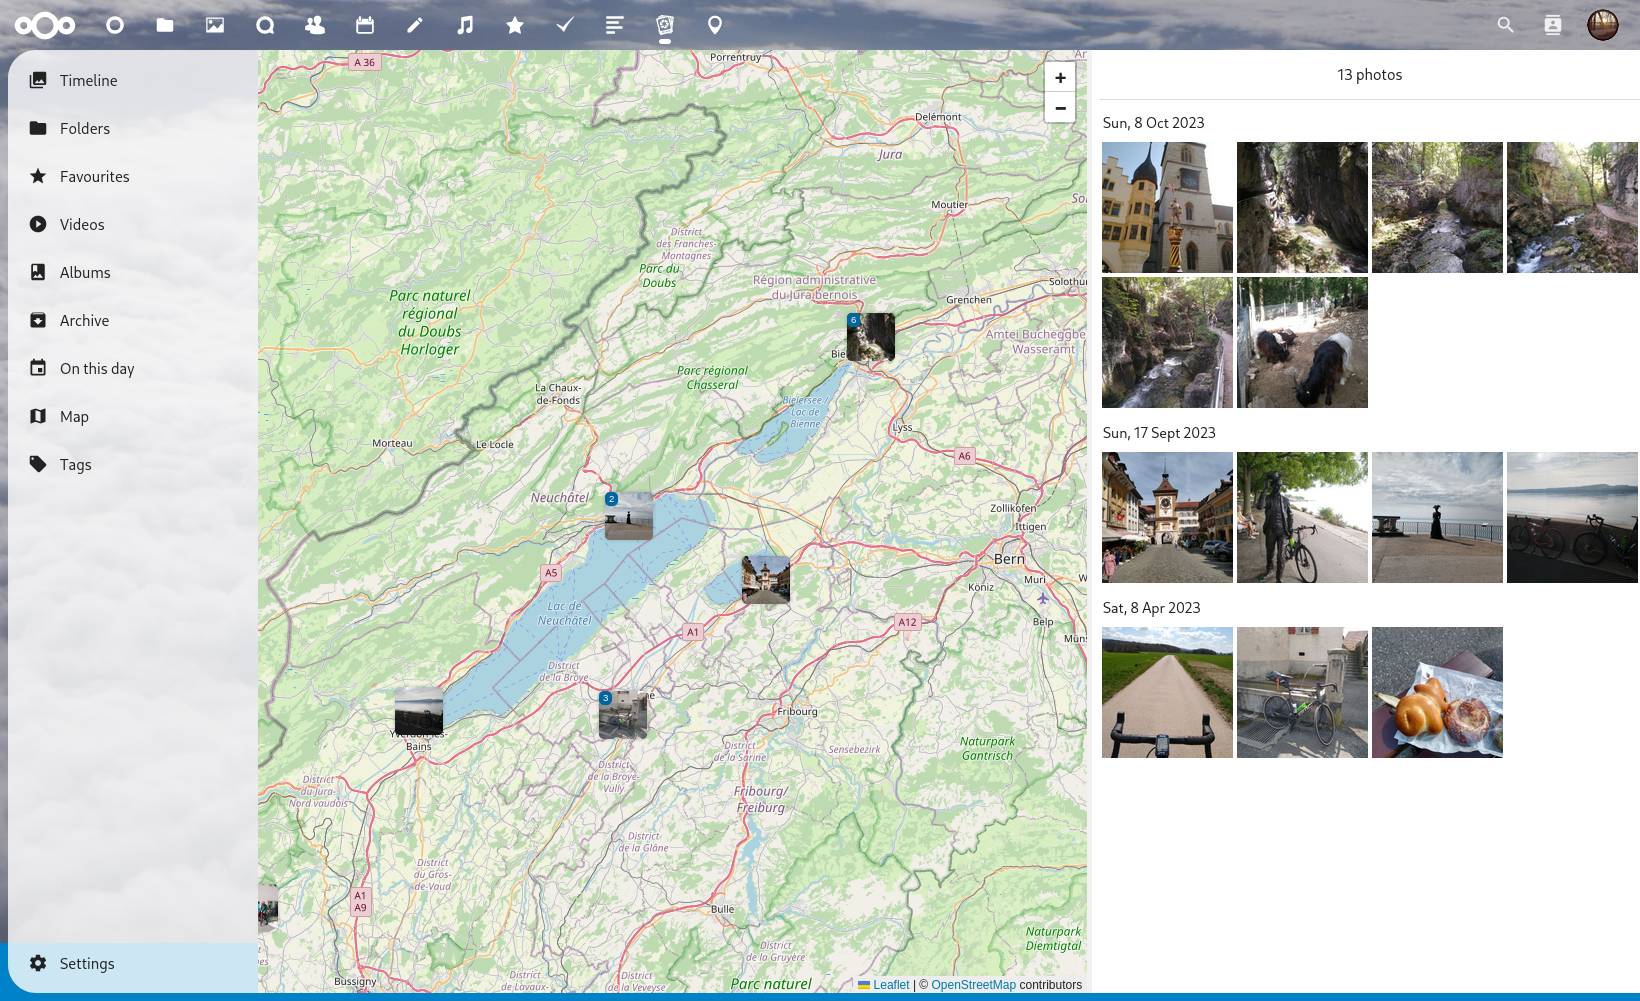 The map view allows visualizing where you were and what you did